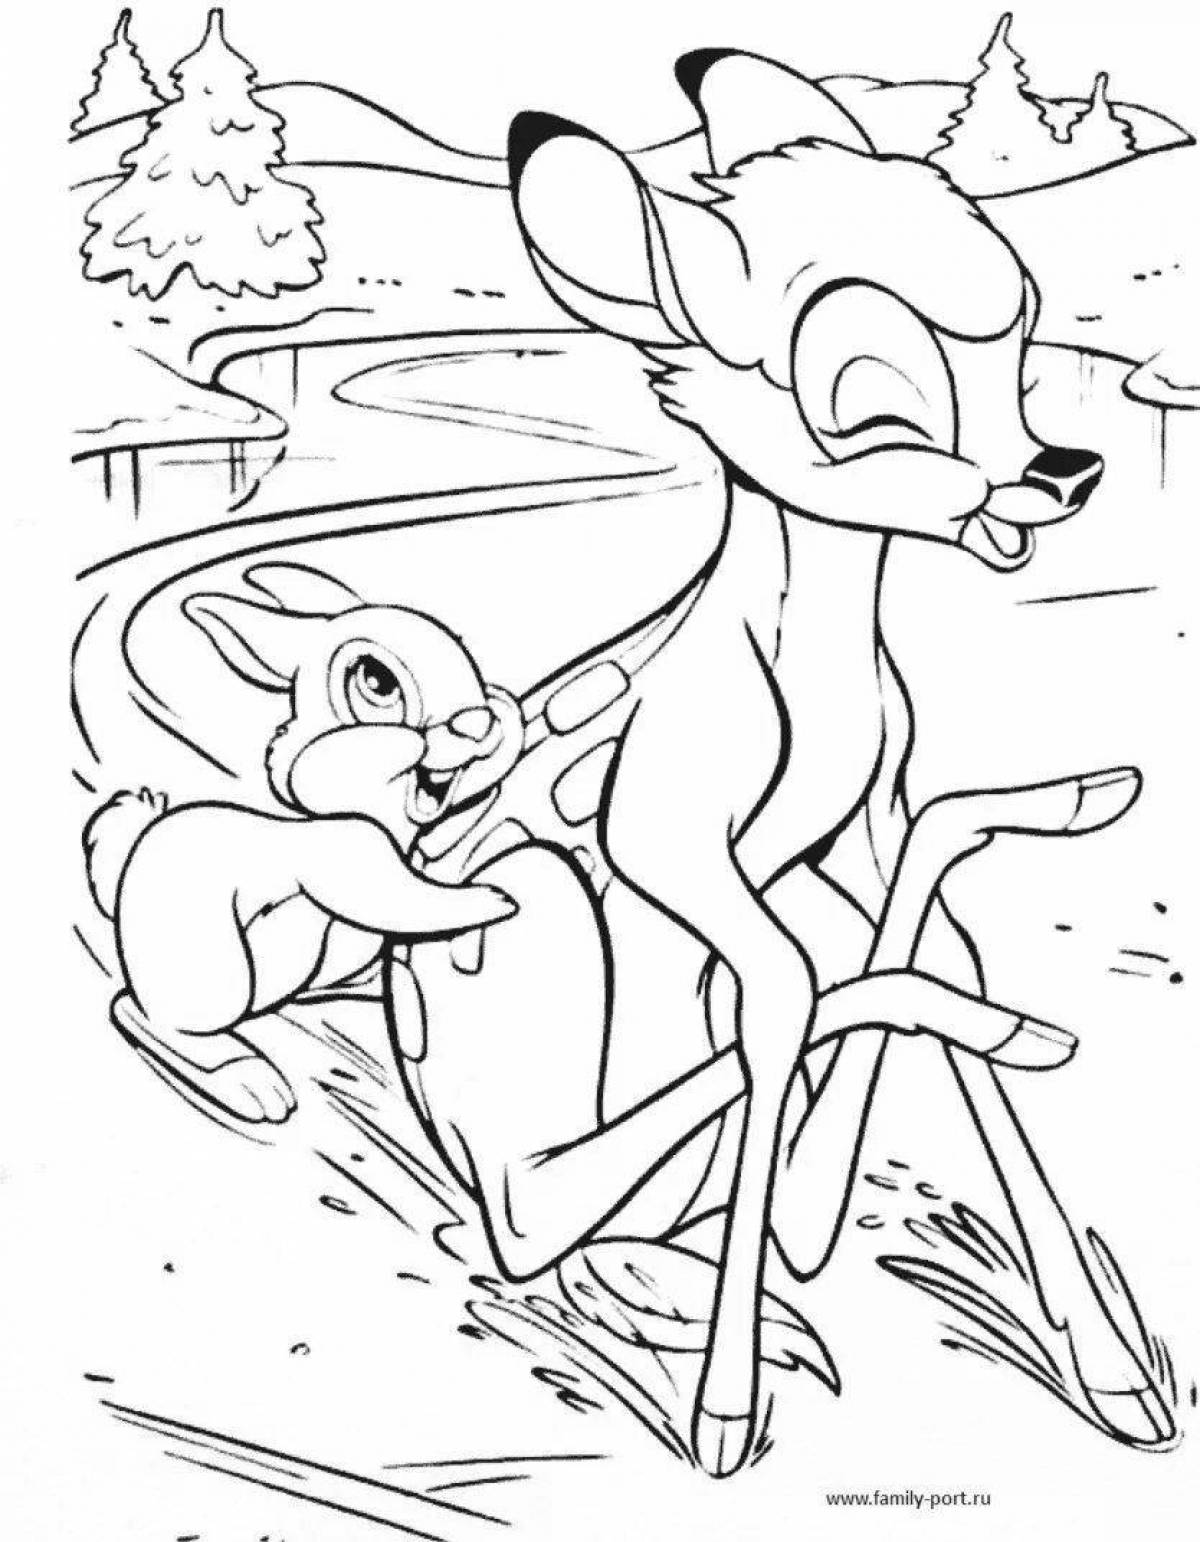 Attractive bambi coloring book for kids